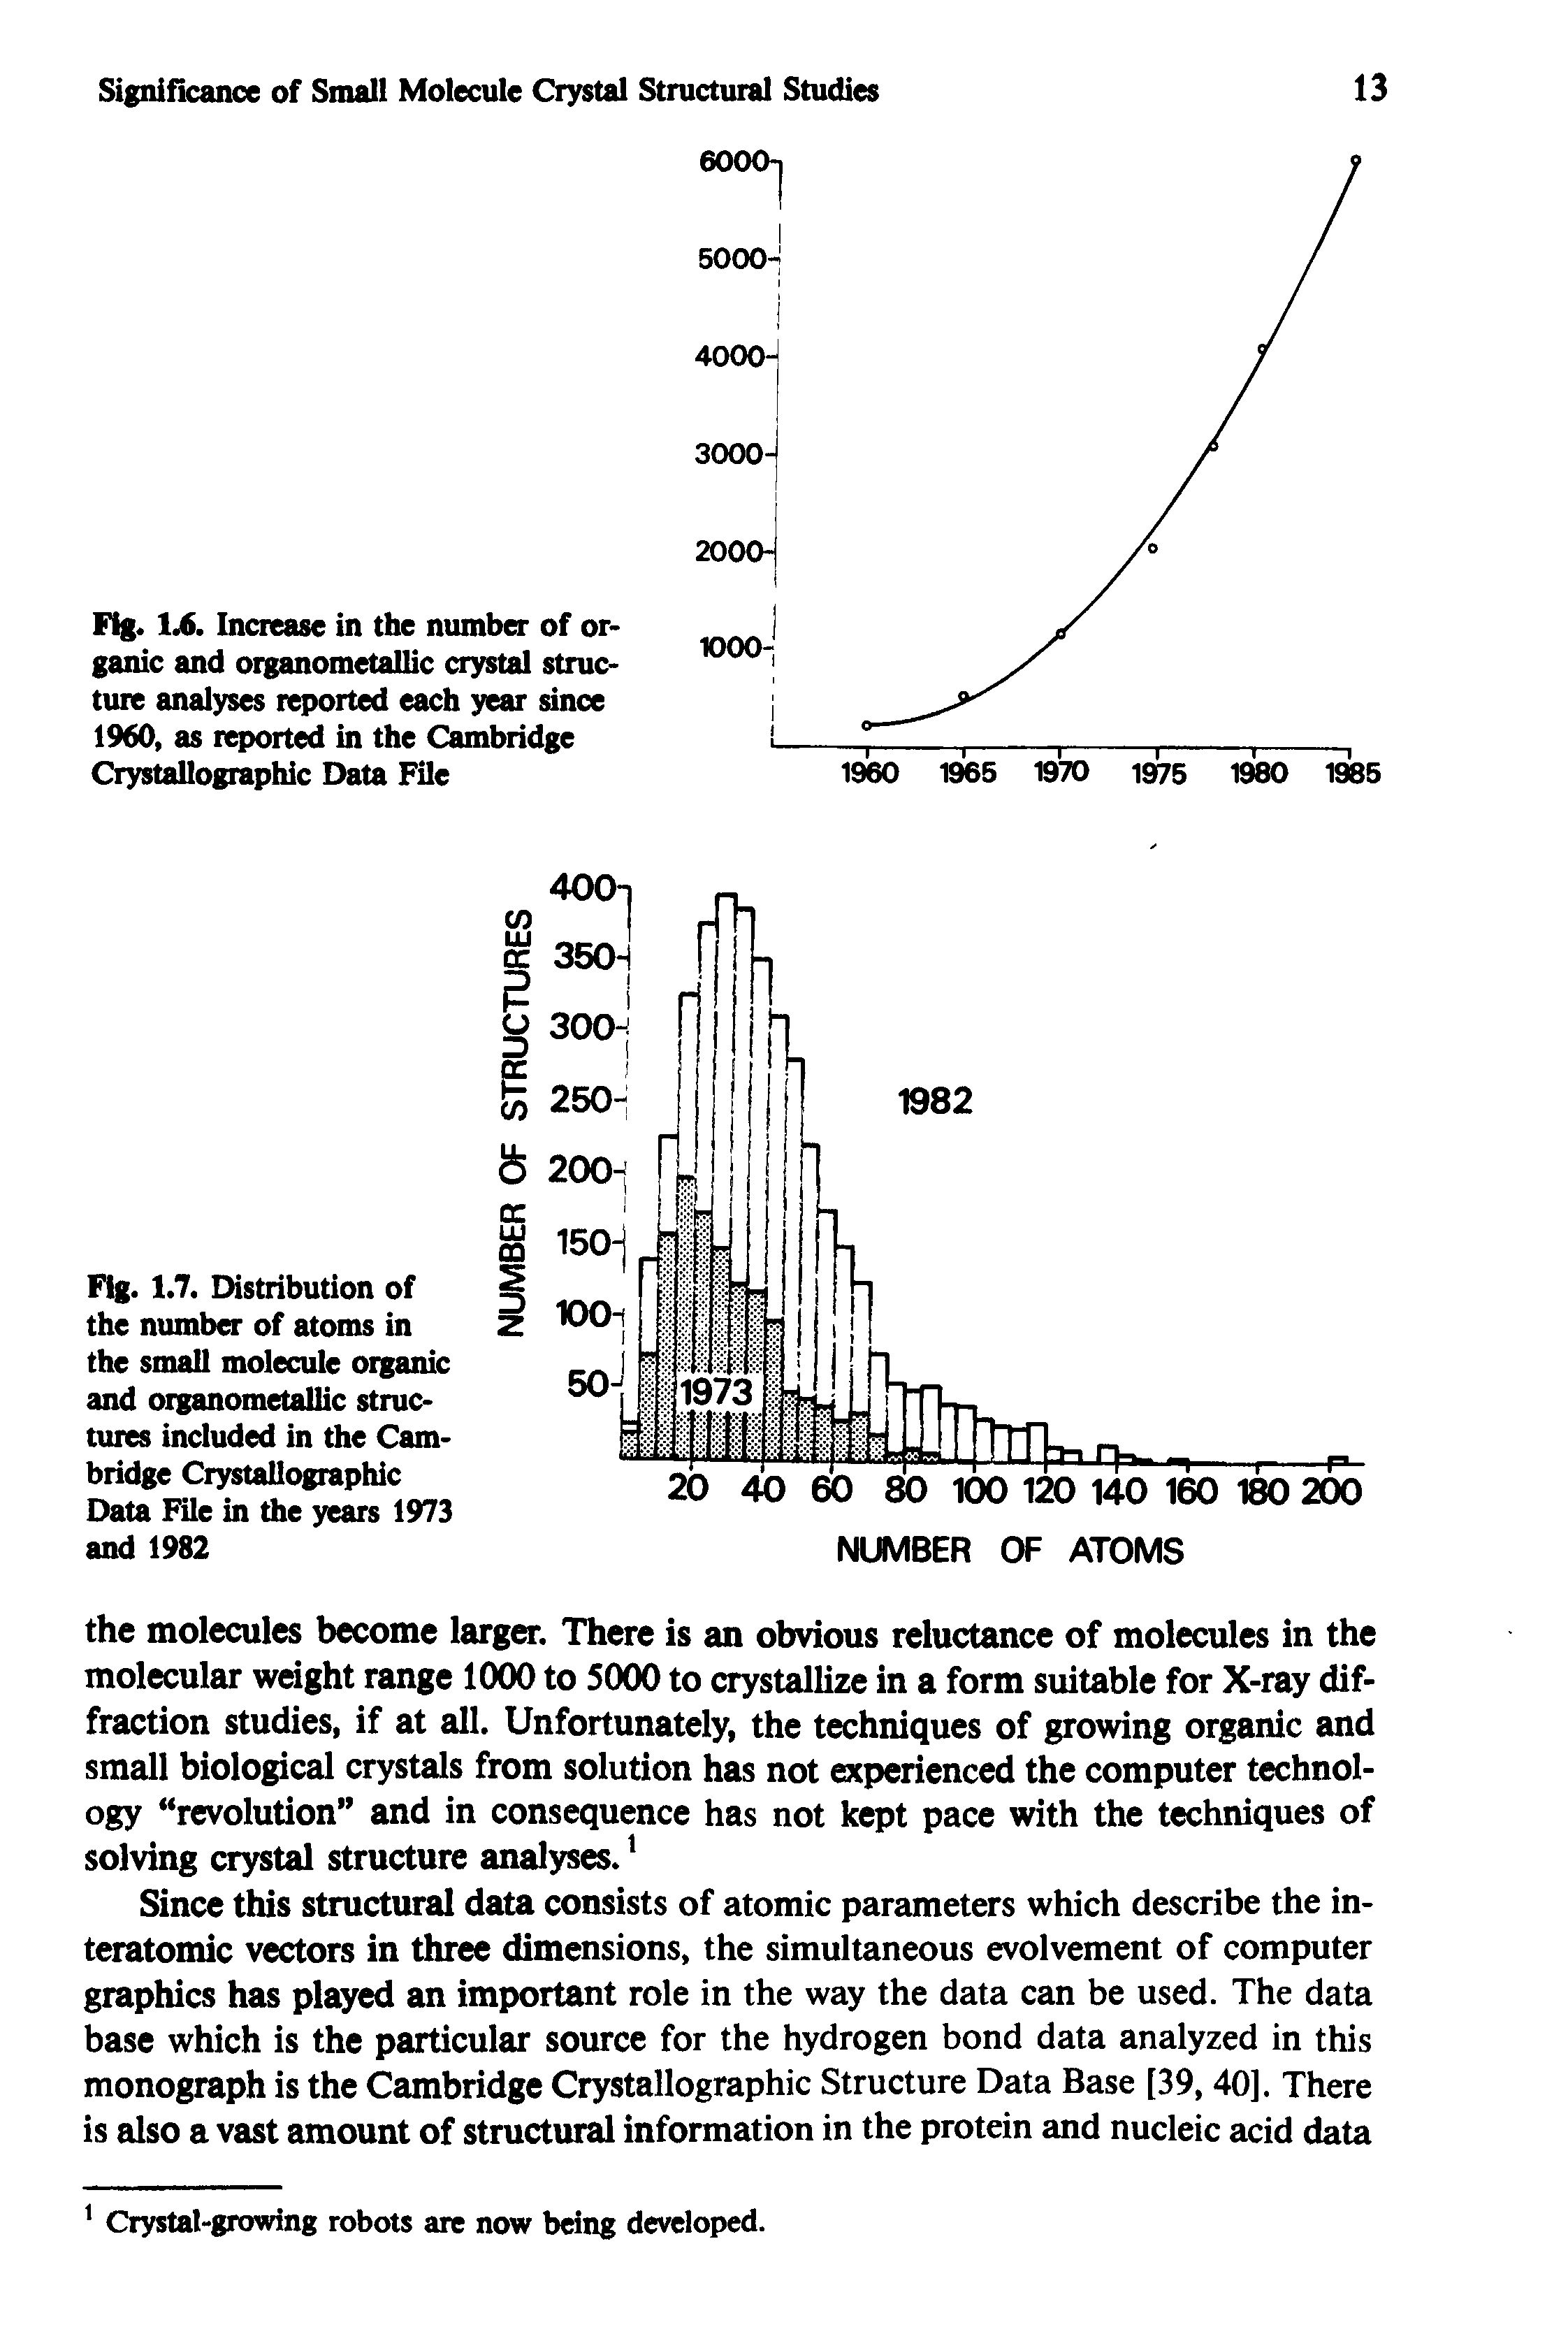 Fig. 1.7. Distribution of the number of atoms in the small molecule organic and organometallic structures included in the Cambridge Crystallographic Data File in the years 1973 and 1982...